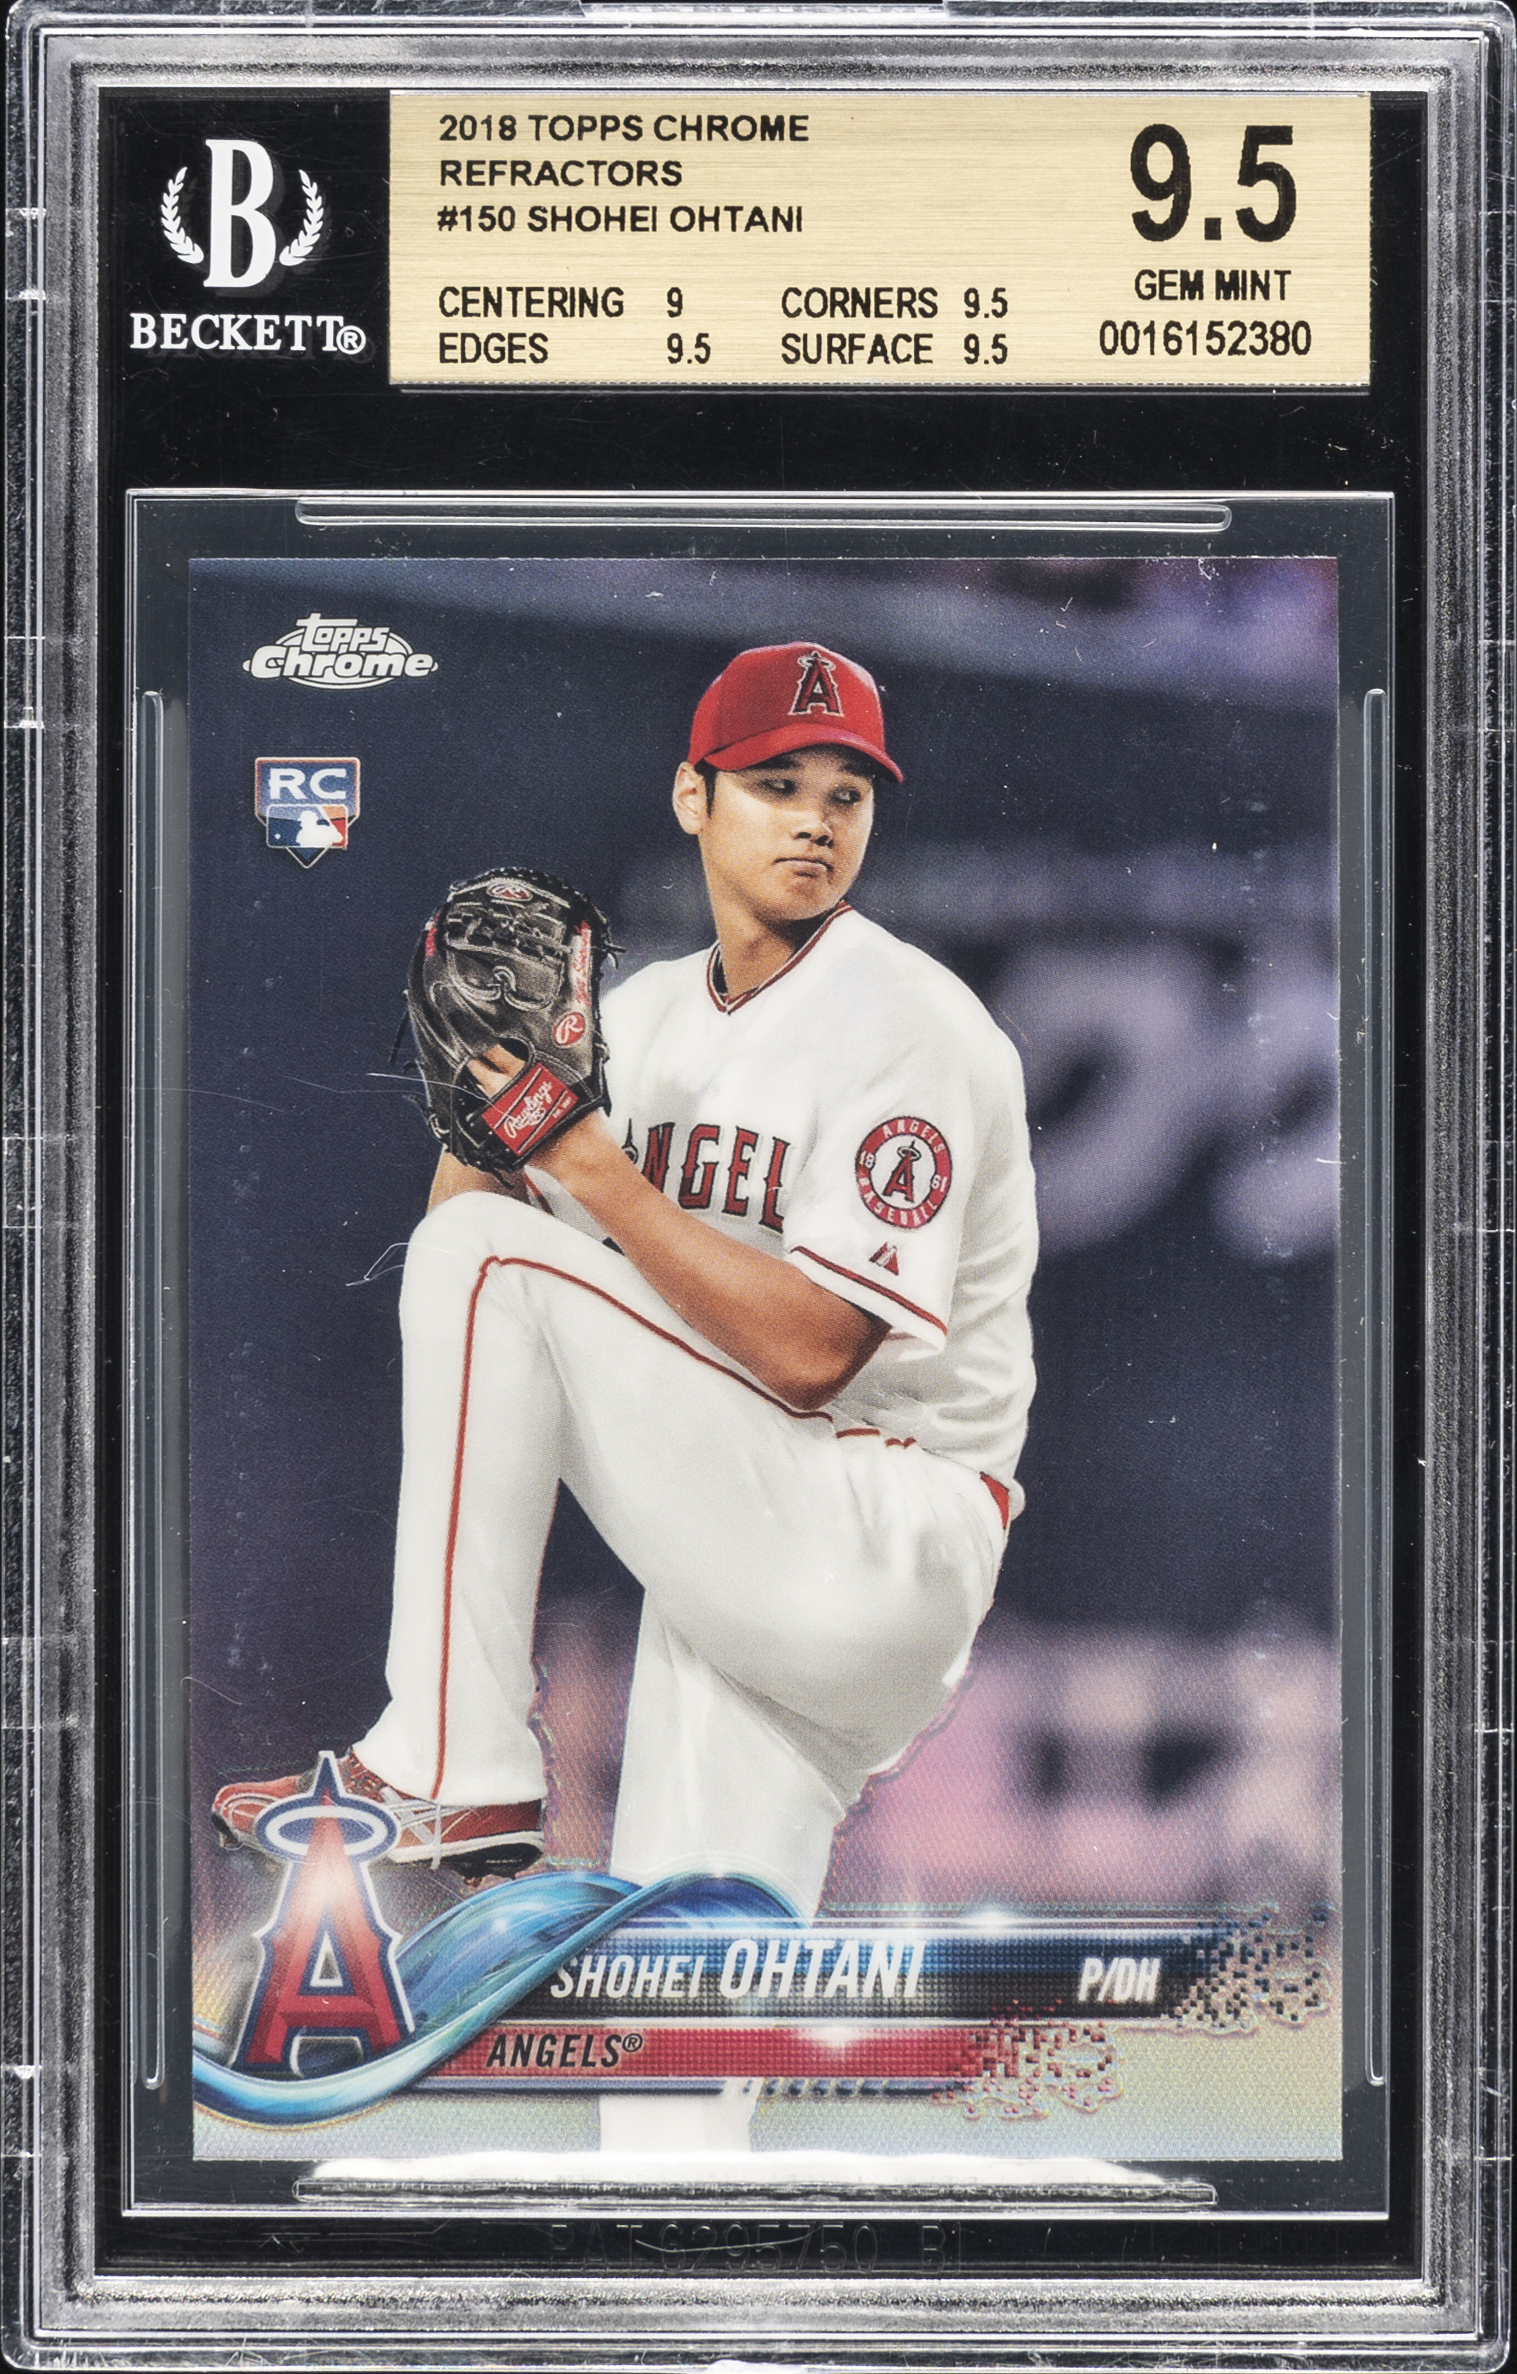 2018 Topps Chrome Pitching Refractor #150 Shohei Ohtani Rookie Card – BGS GEM MINT 9.5